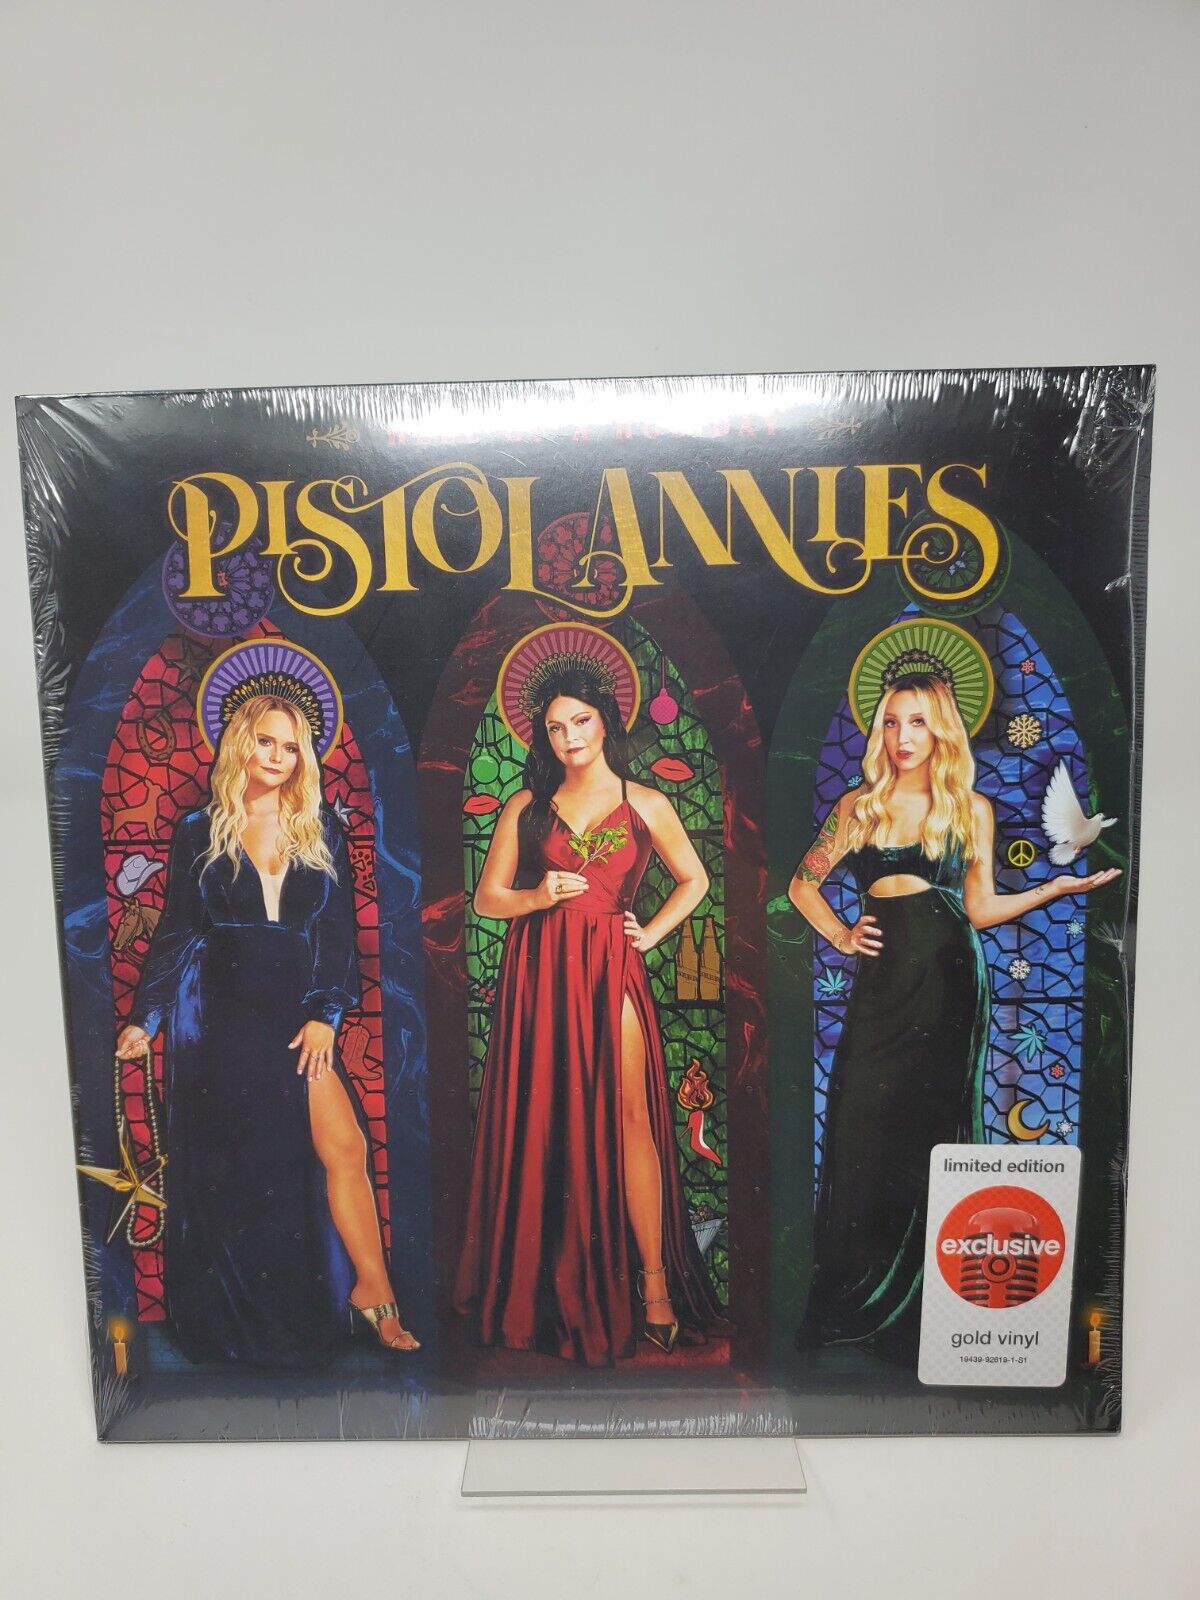 Pistol Annies - Hell of a Holiday (Limited Edition, Gold Vinyl LP) - NEW !!!